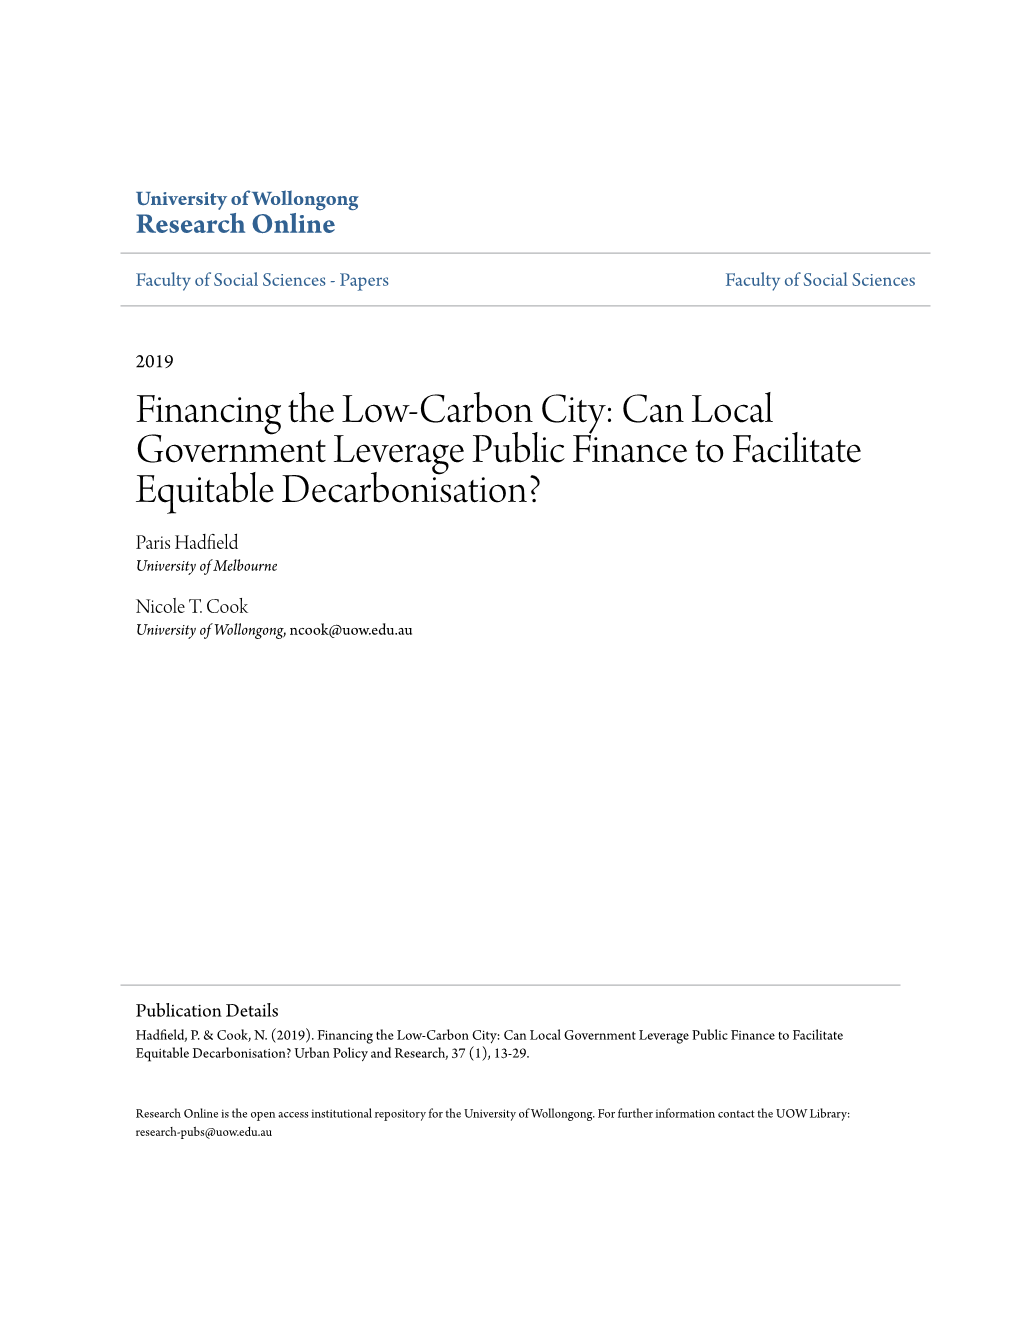 Financing the Low-Carbon City: Can Local Government Leverage Public Finance to Facilitate Equitable Decarbonisation? Paris Hadfield University of Melbourne